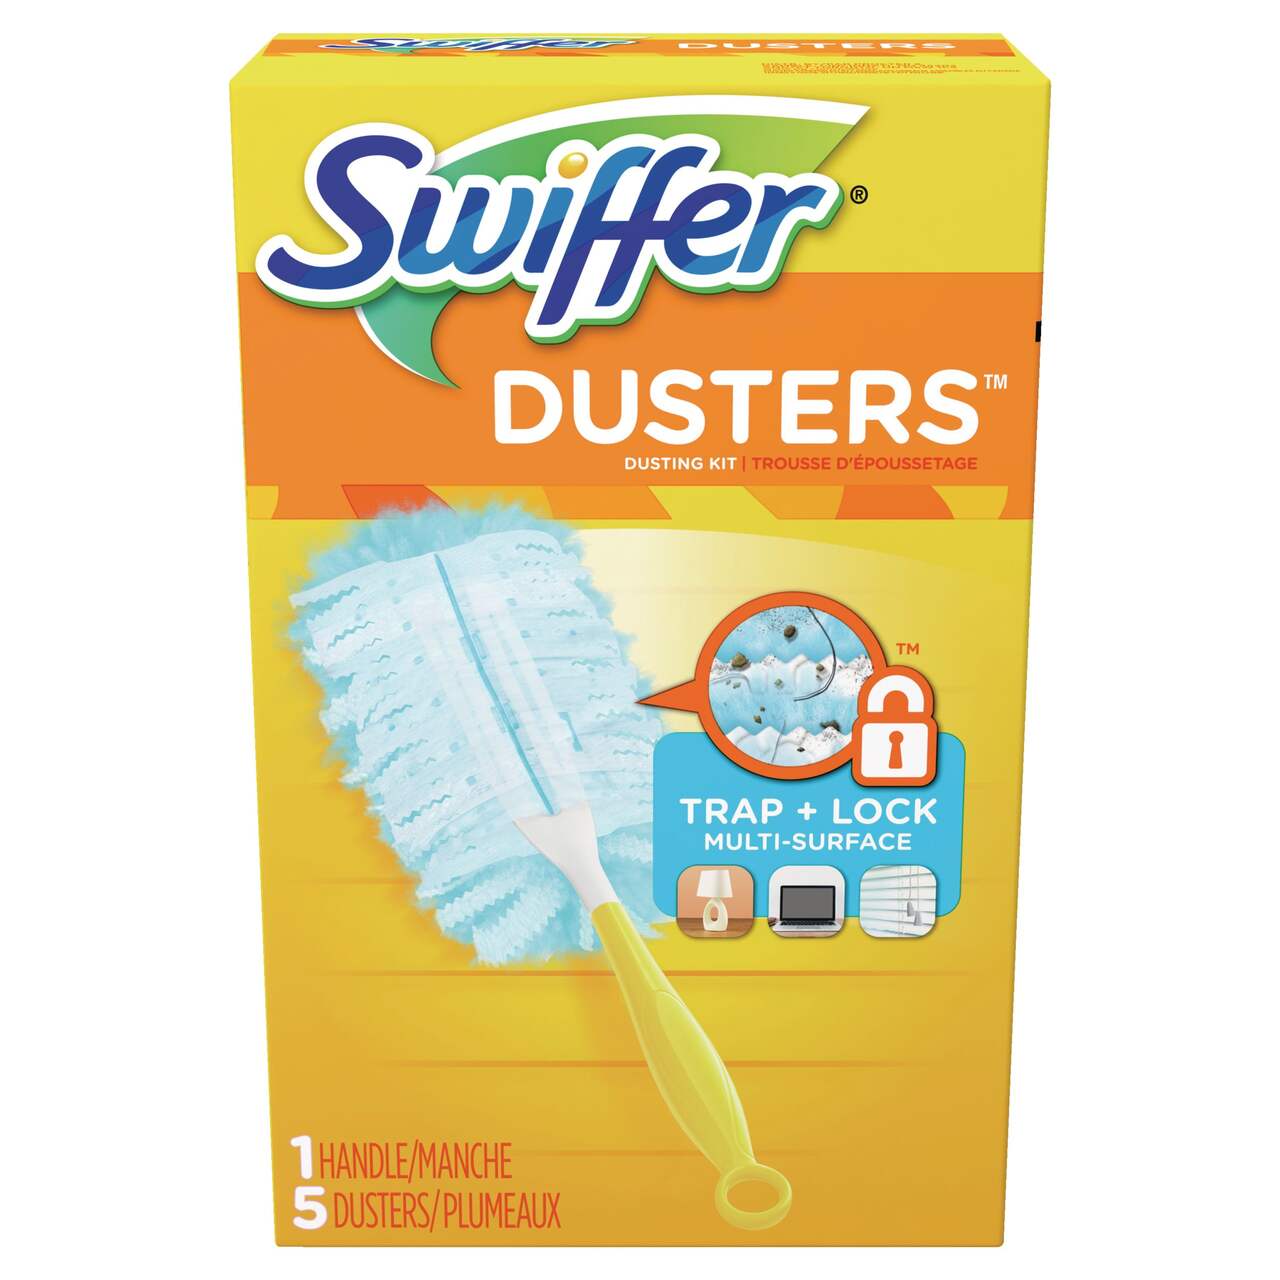 Swiffer Dusters Starter Kit, Kit Includes 1 Handle and 5 Dusters